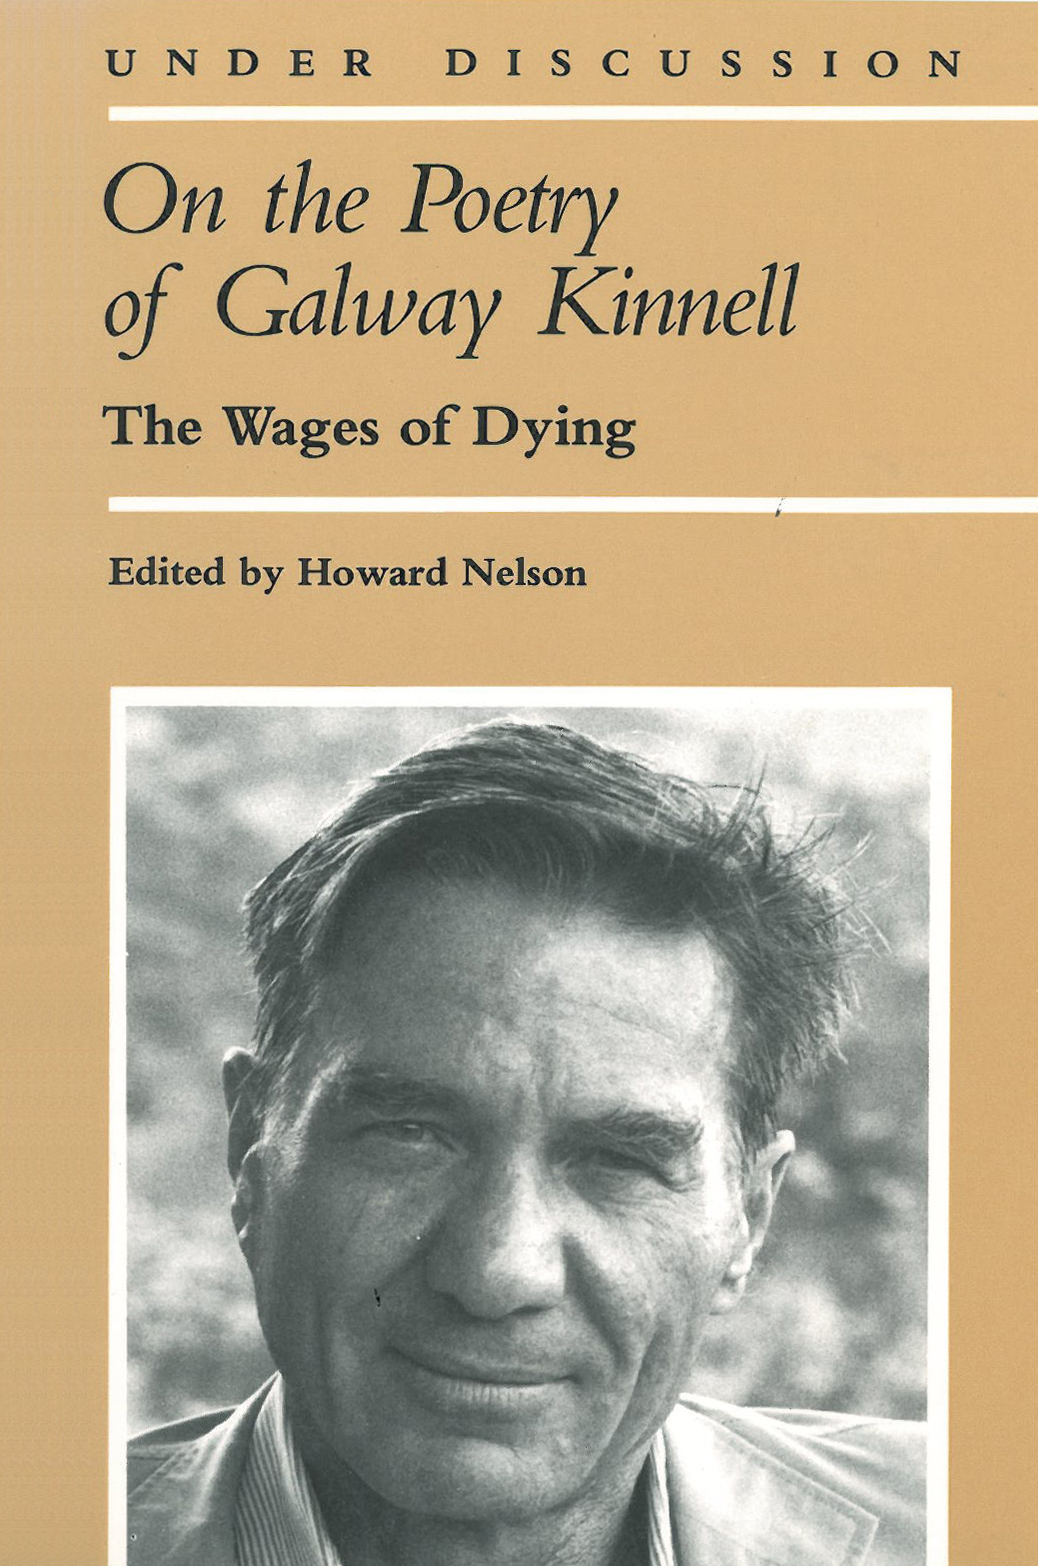 On the Poetry of Galway Kinnell